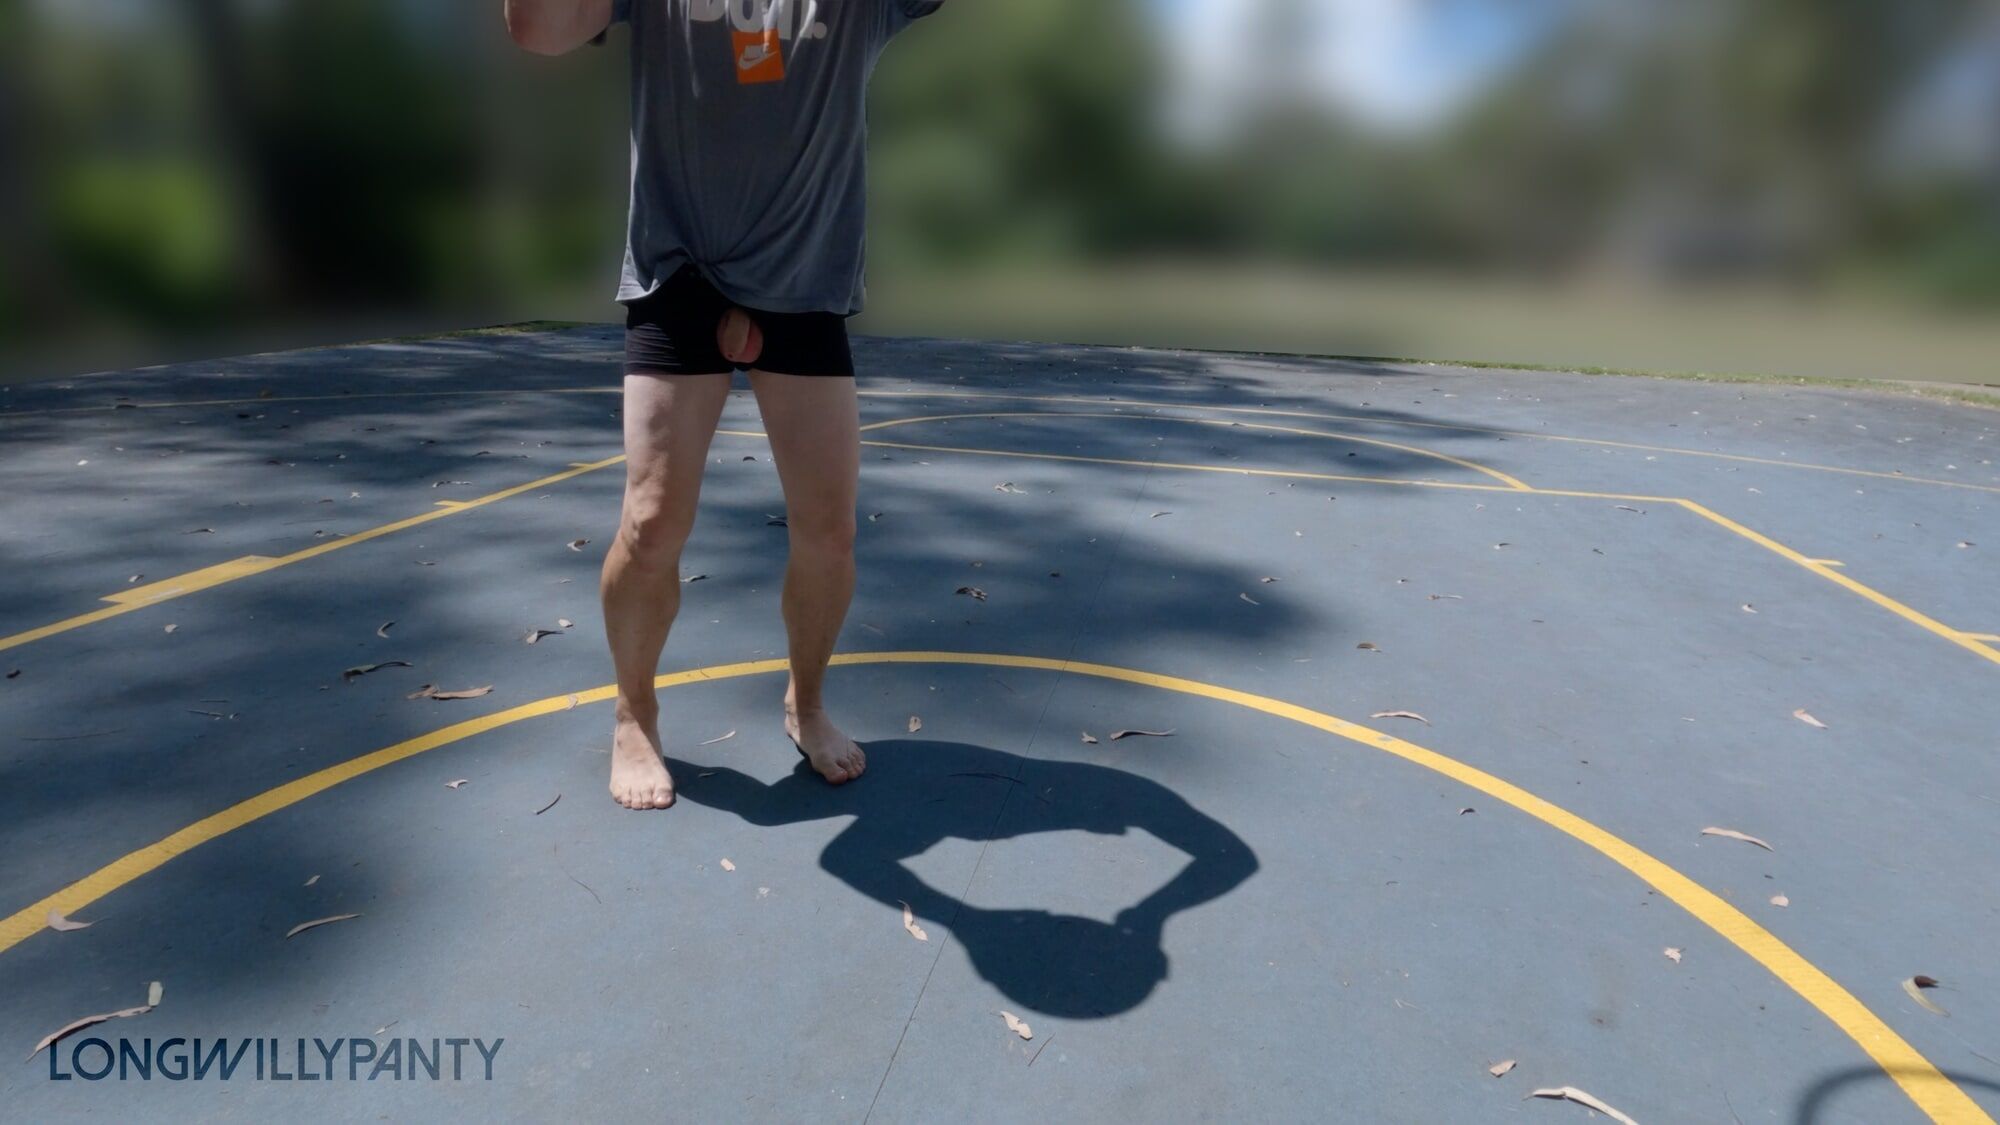 Cock out basketball - new location #5